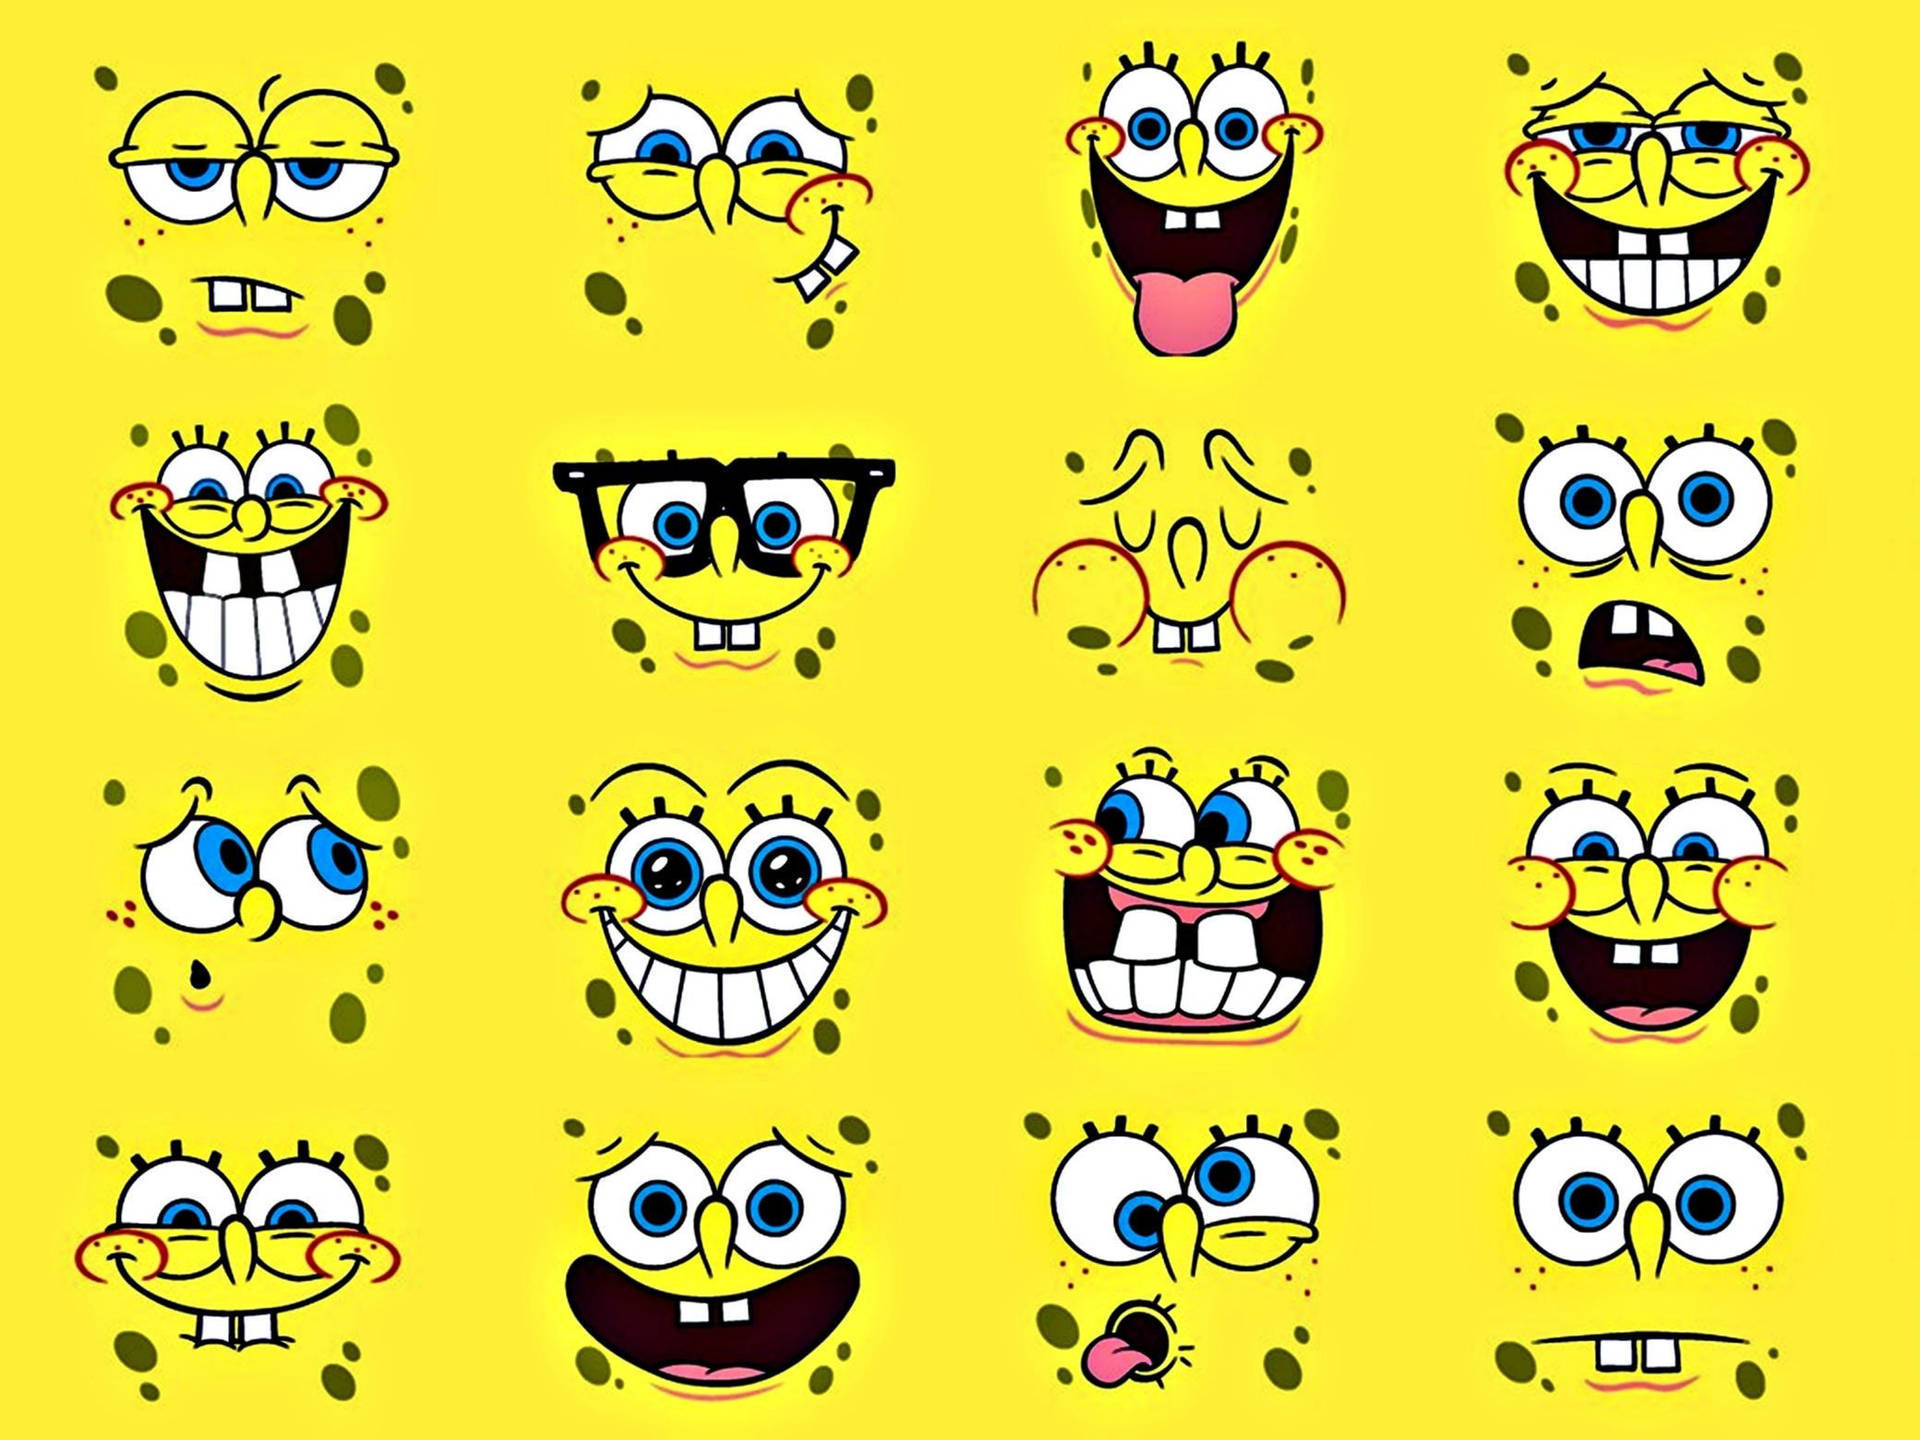 What's Up With These Confusing Spongebob Squarepants Faces? Background